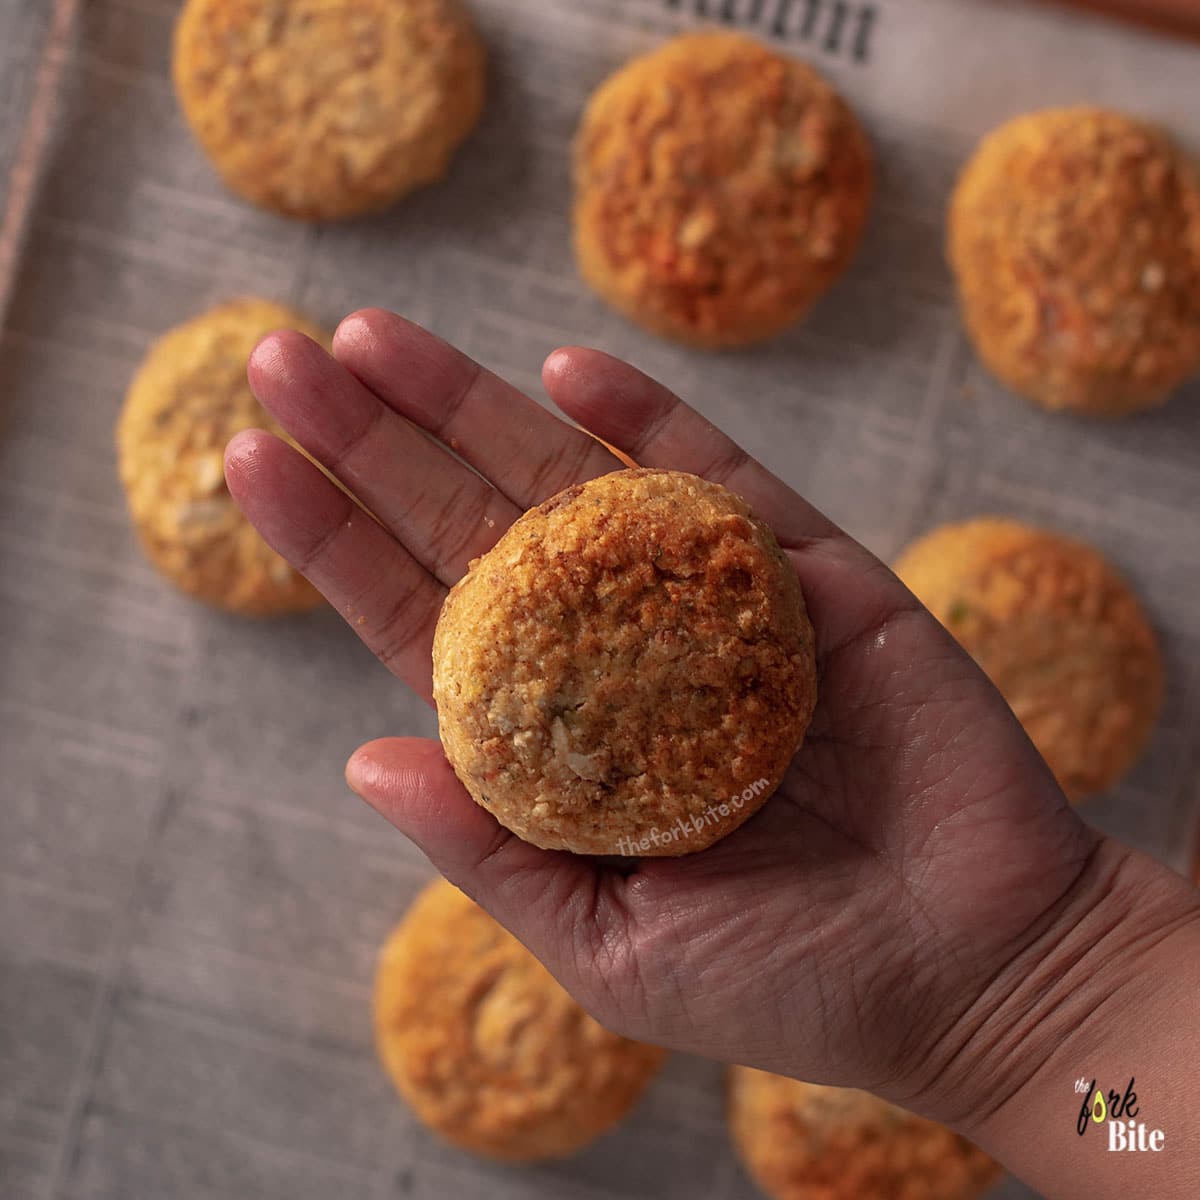 Take the crab meat mixture and create same sized patties. I prefer to make them round, but if you want to be more creative, please feel free. Each patty should be approximately 1 inch thick.